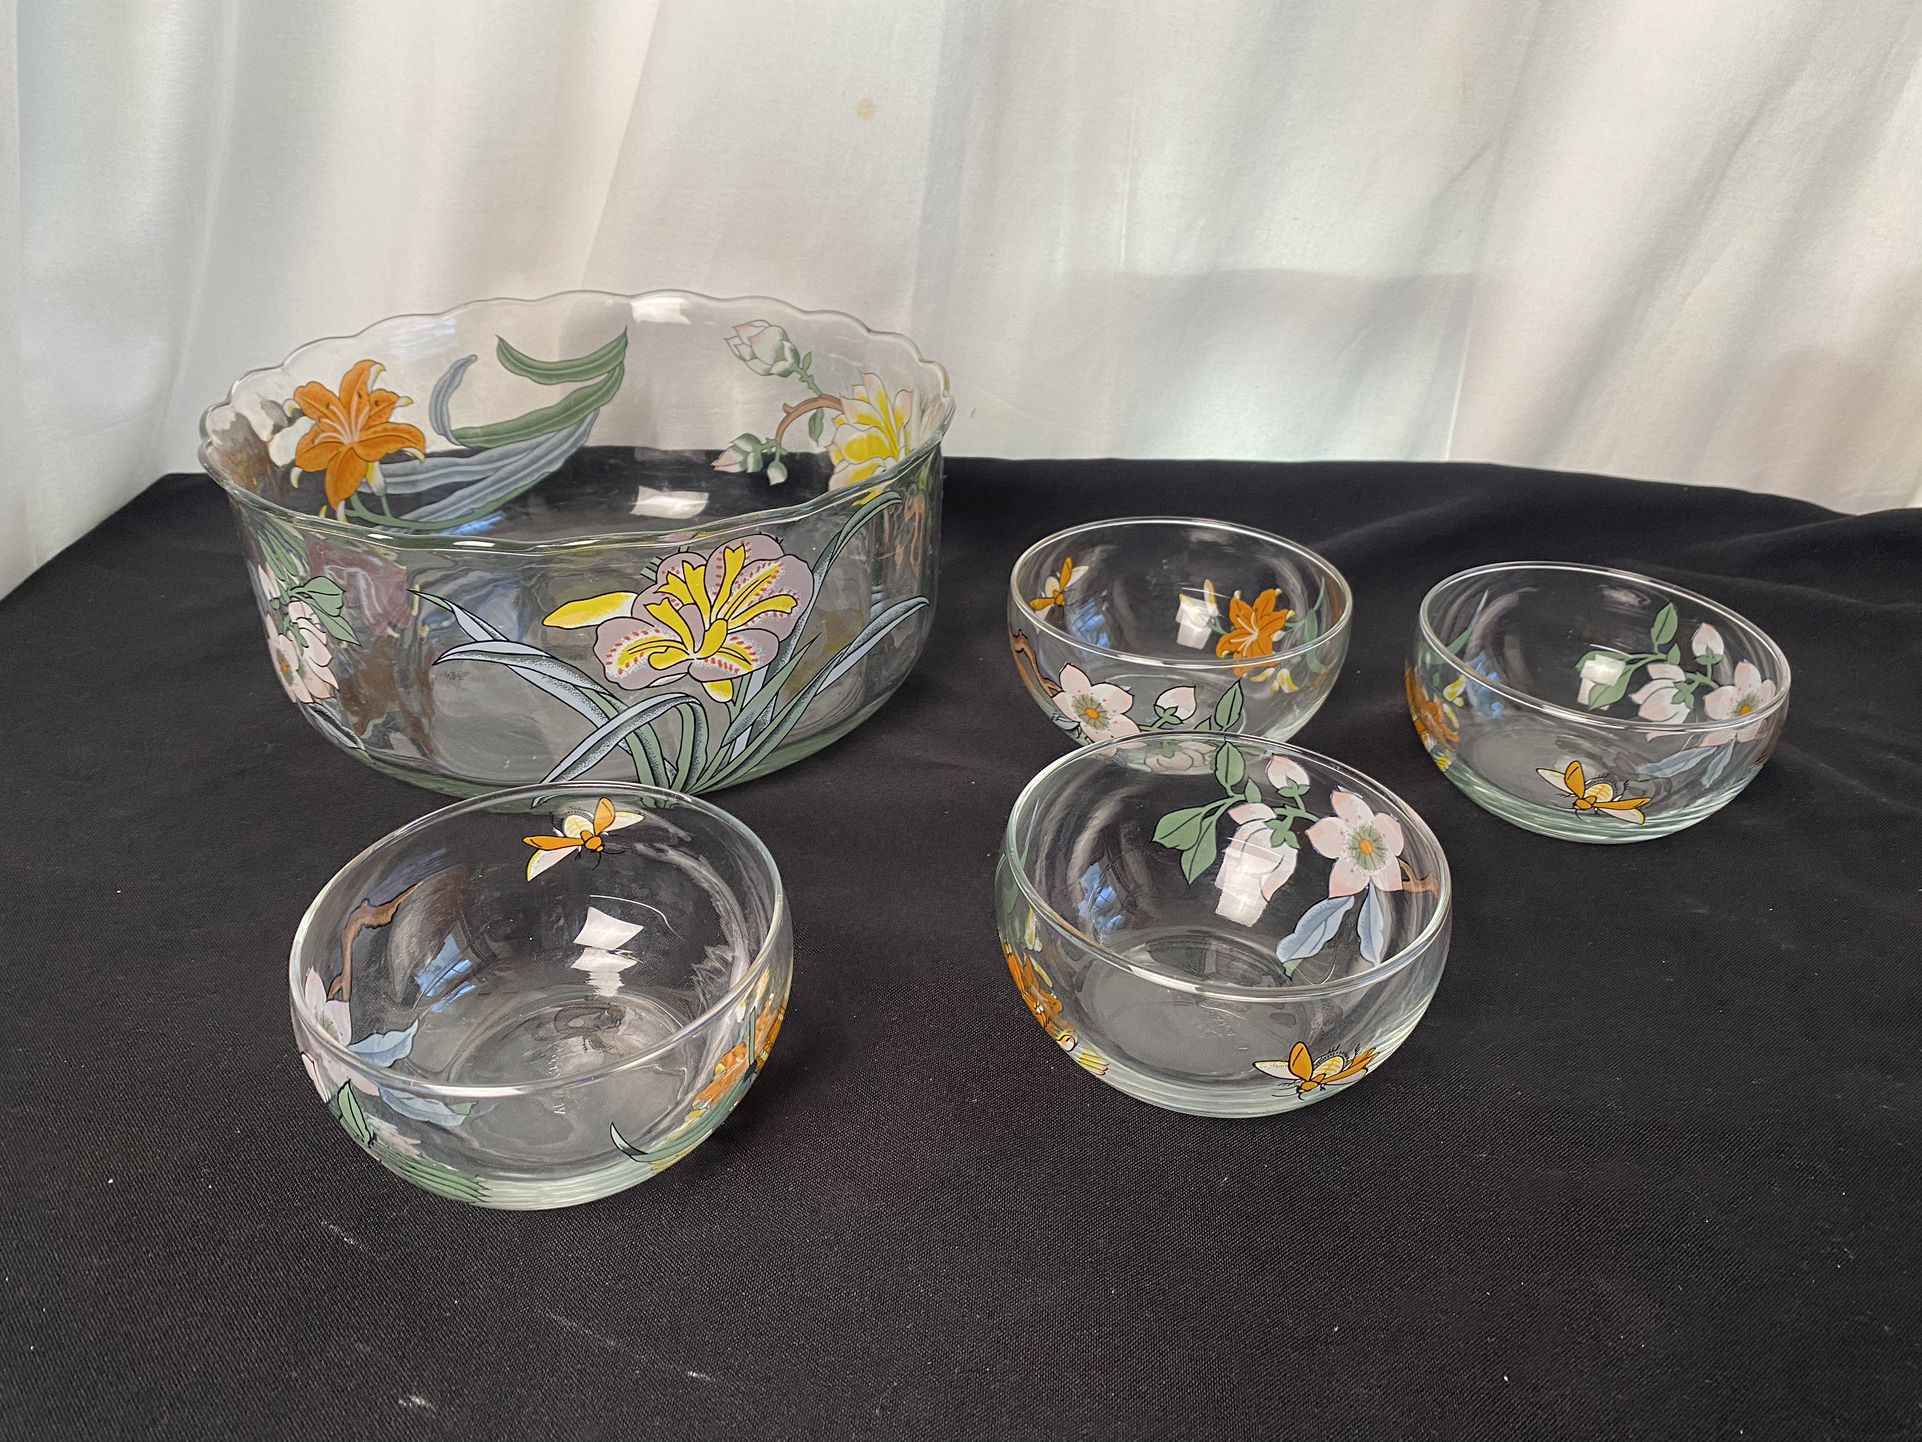 Vintage 1960’s 5 piece Large Glass Salad Bowl with 4 Salad Bowls Floral Firefly’s Made In Canada (Rare Collectors Items!)